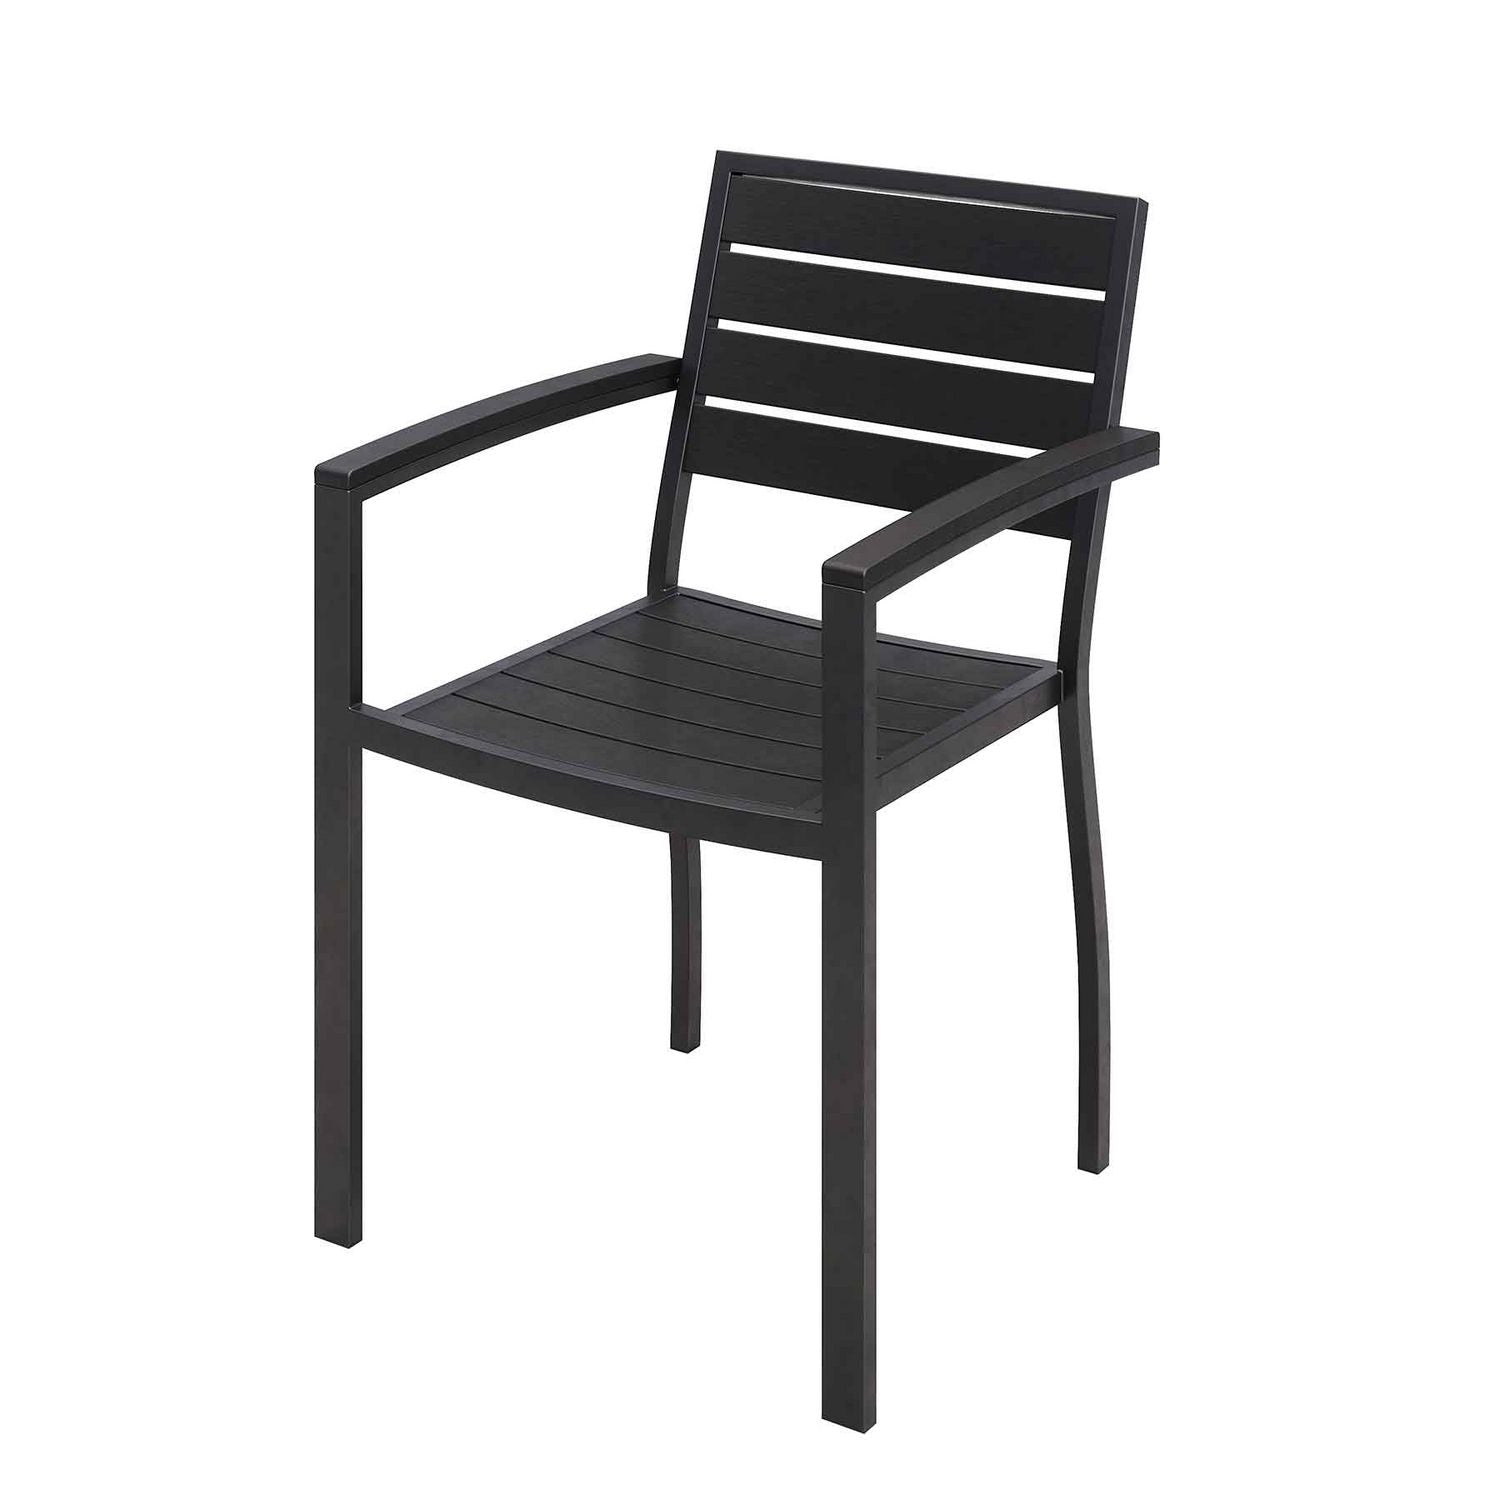 eveleen-outdoor-patio-table-with-six-black-powder-coated-polymer-chairs-32-x-55-x-29-black-ships-in-4-6-business-days_kfi840031925244 - 3